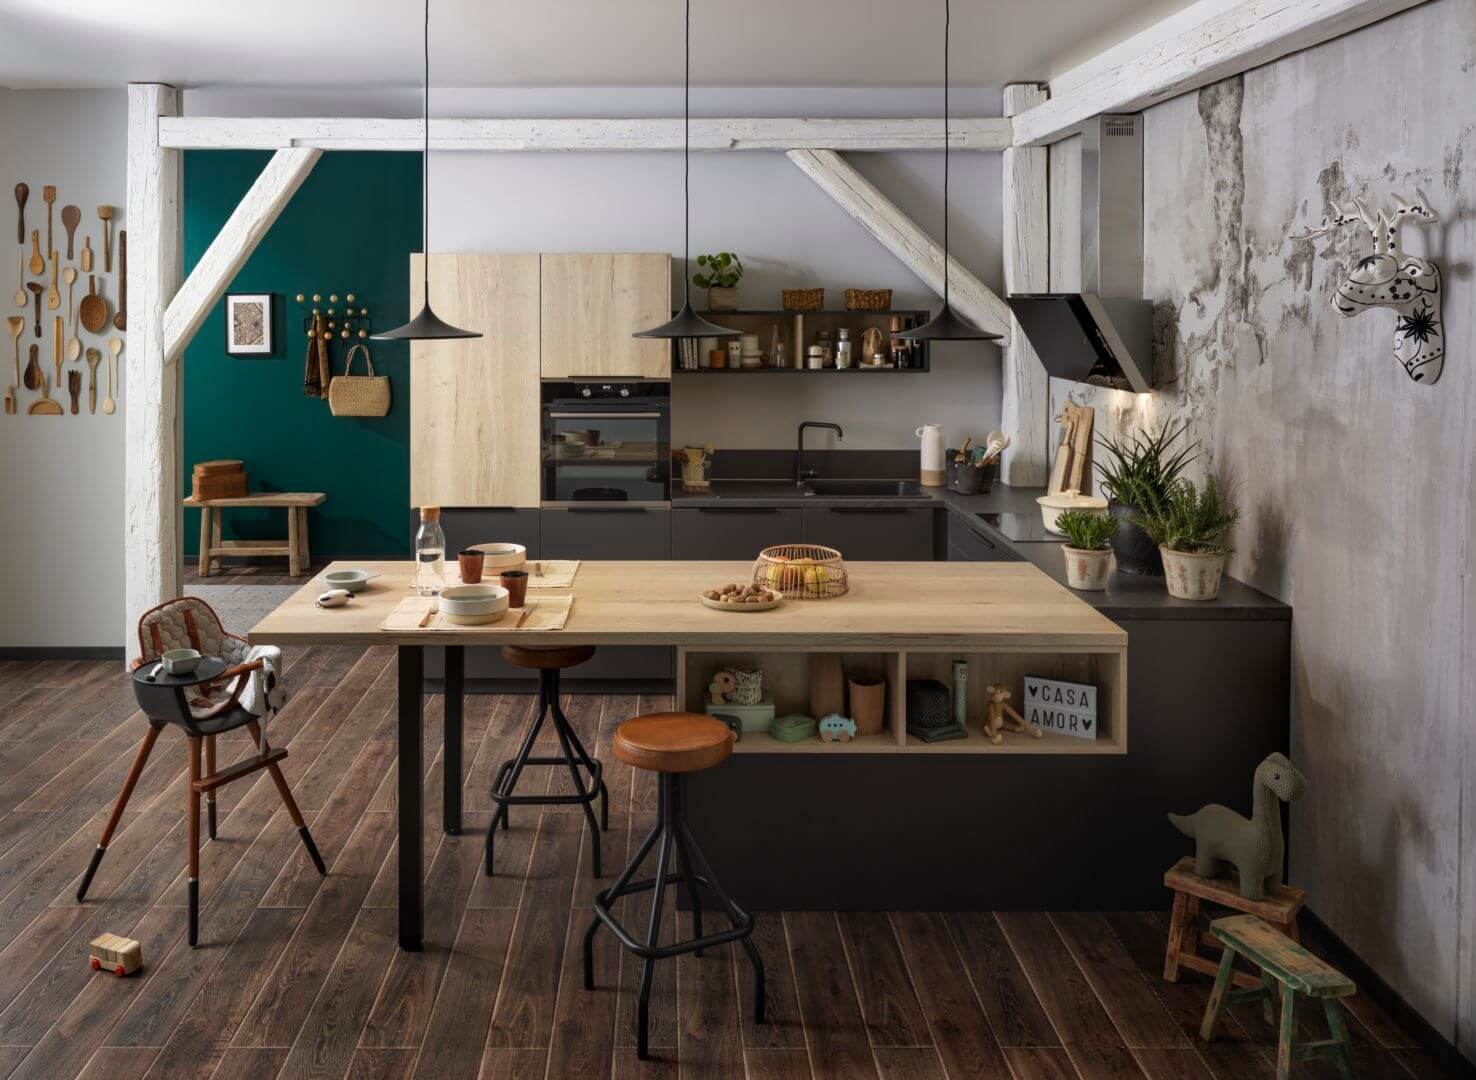 3- A kitchen with the character between black and wood